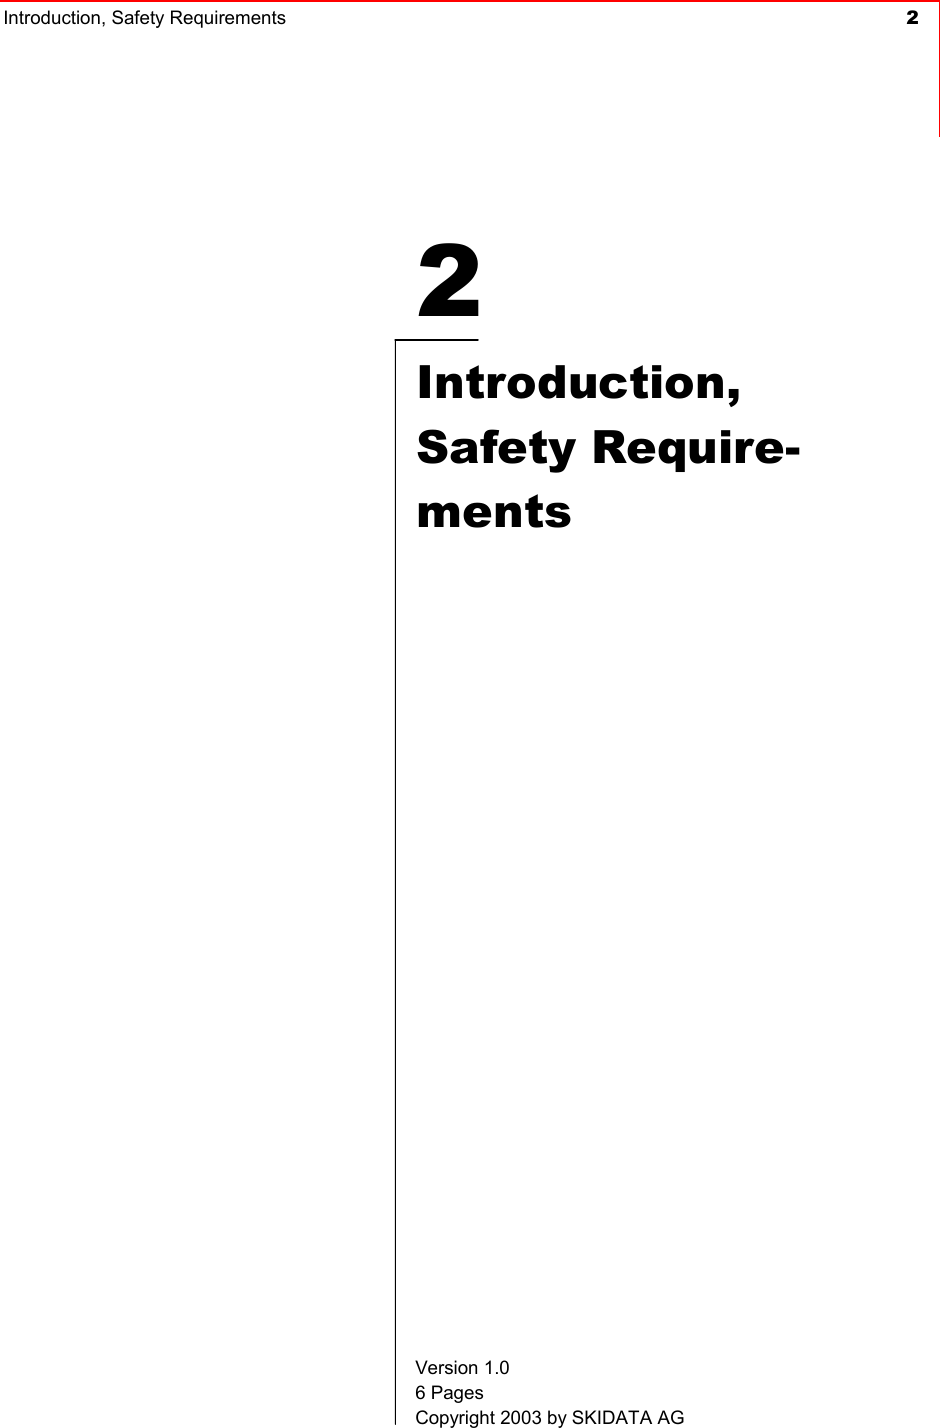 Introduction, Safety Requirements  2     2  Introduction, Safety Require-ments   Version 1.0 6 Pages Copyright 2003 by SKIDATA AG 